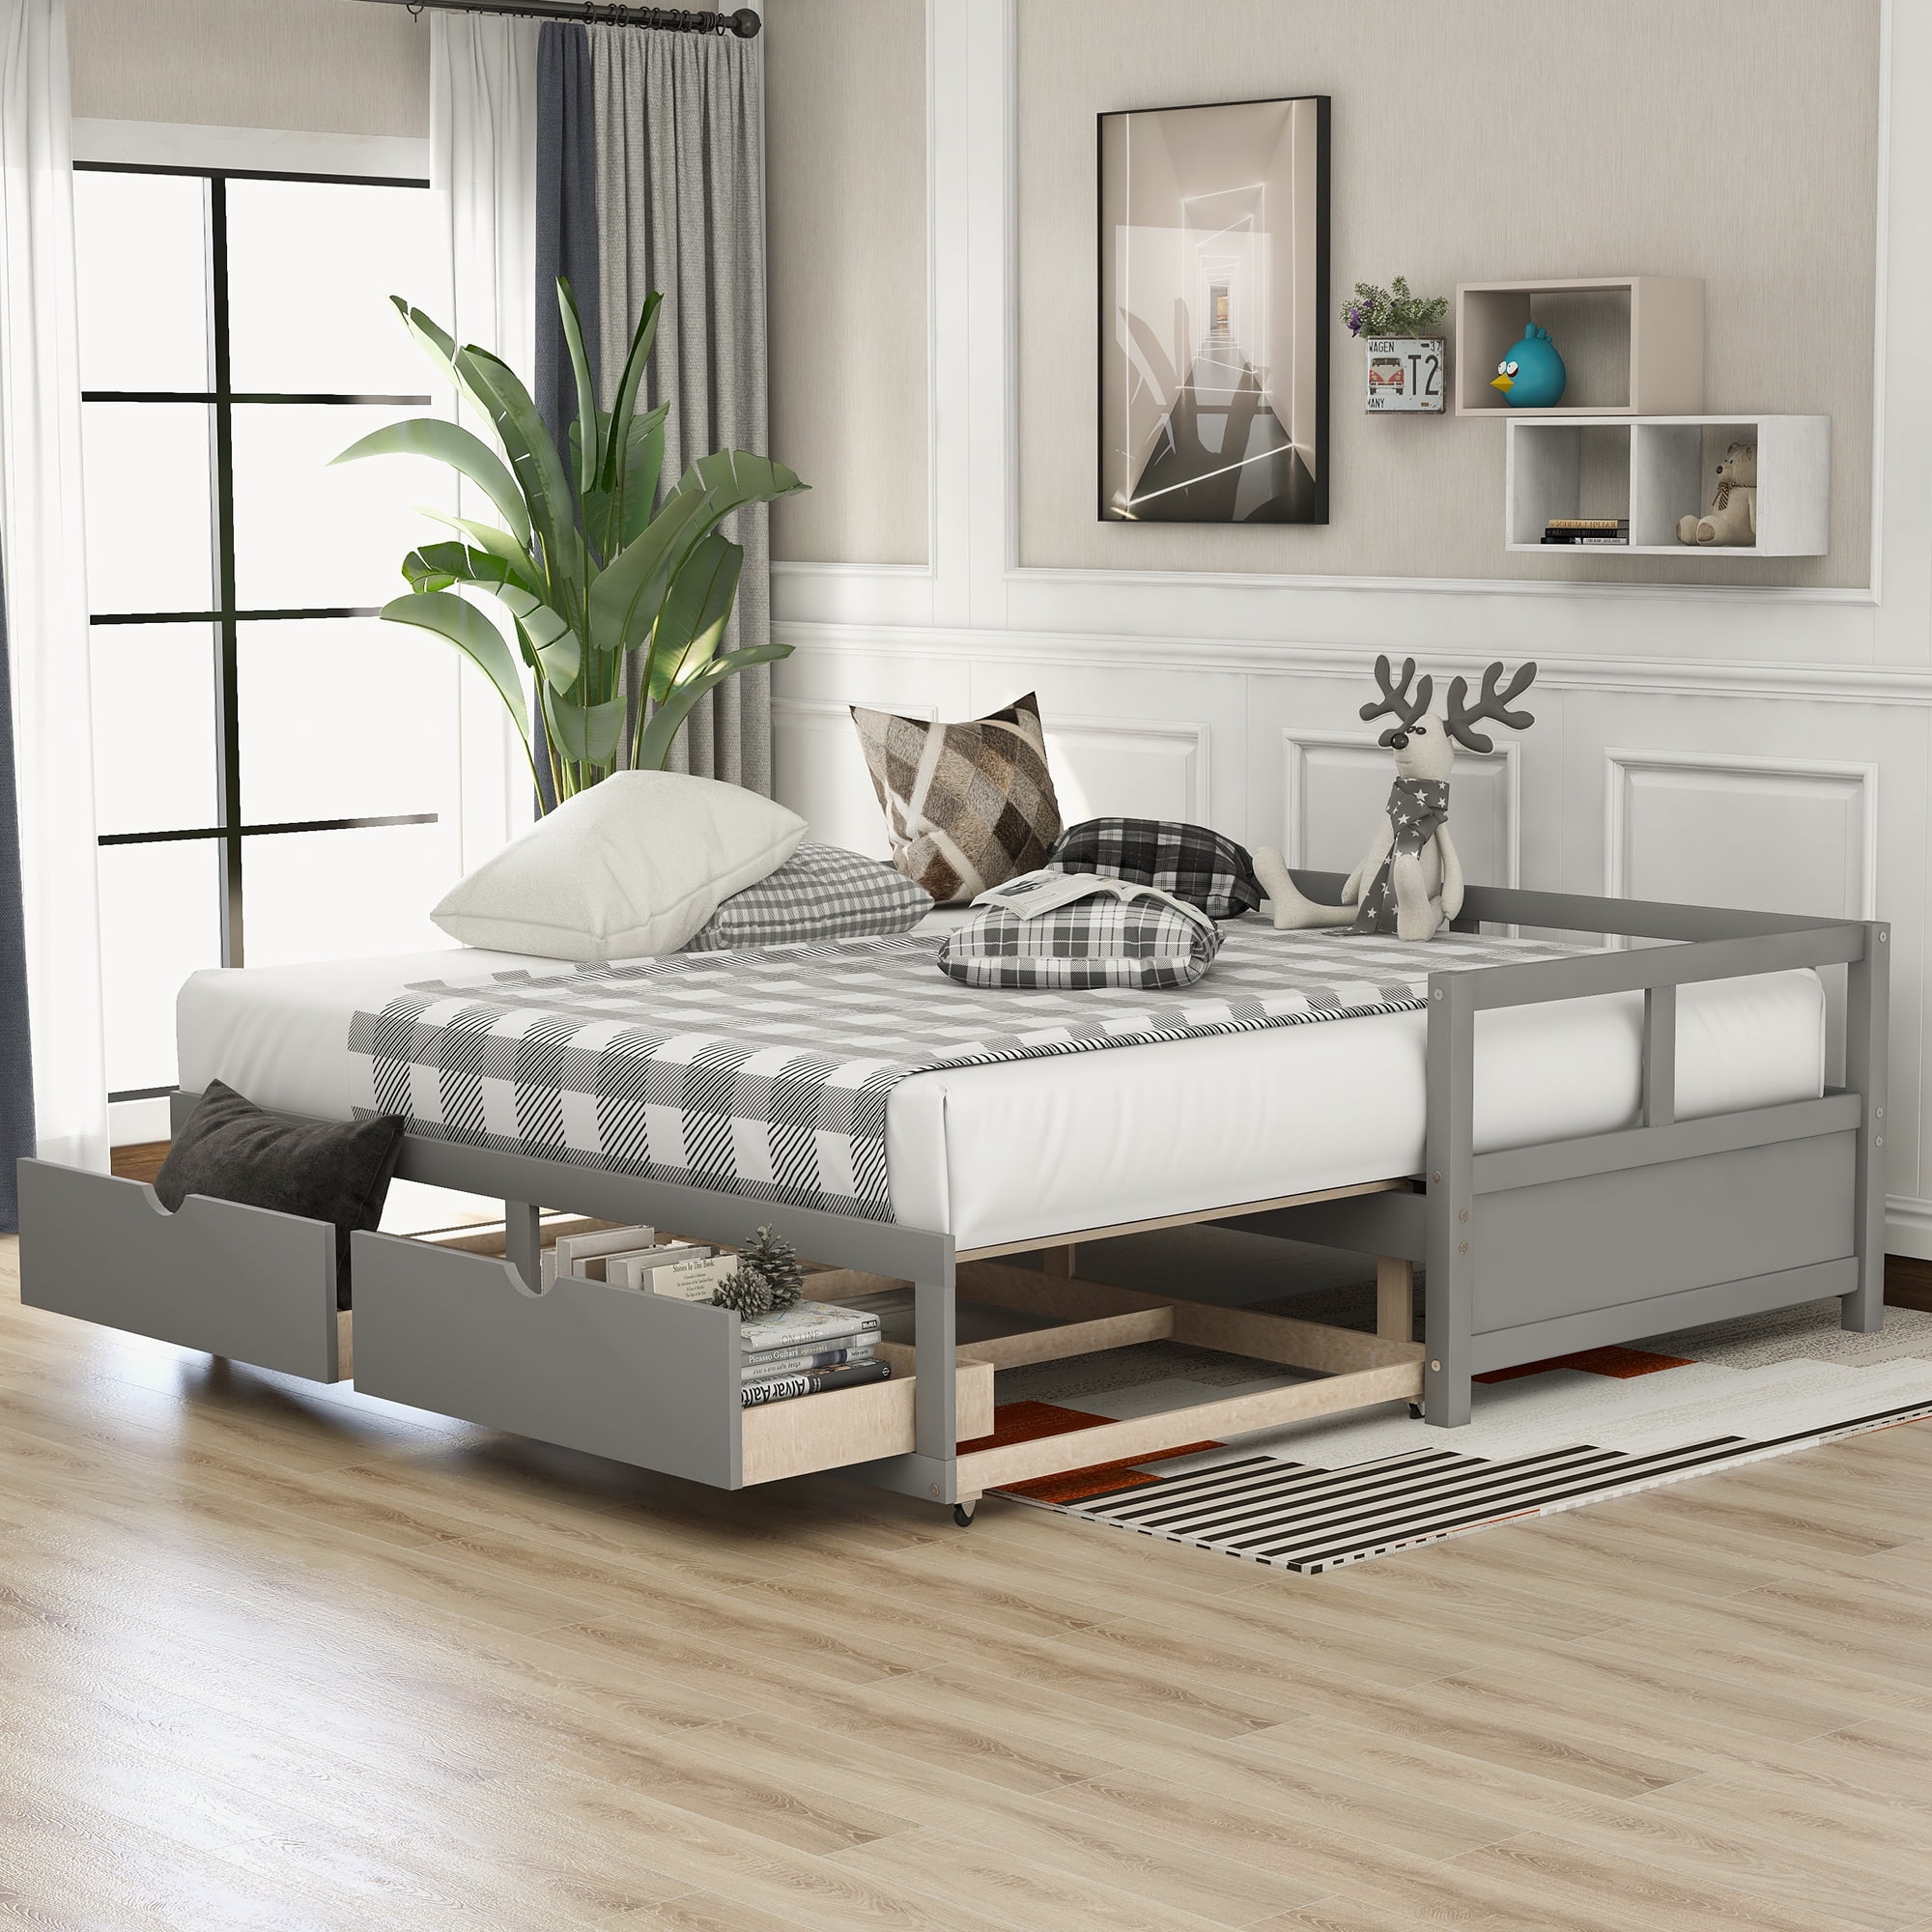 Extendable Bed Daybed Frame, Twin Size Mattress For Trundle Bed